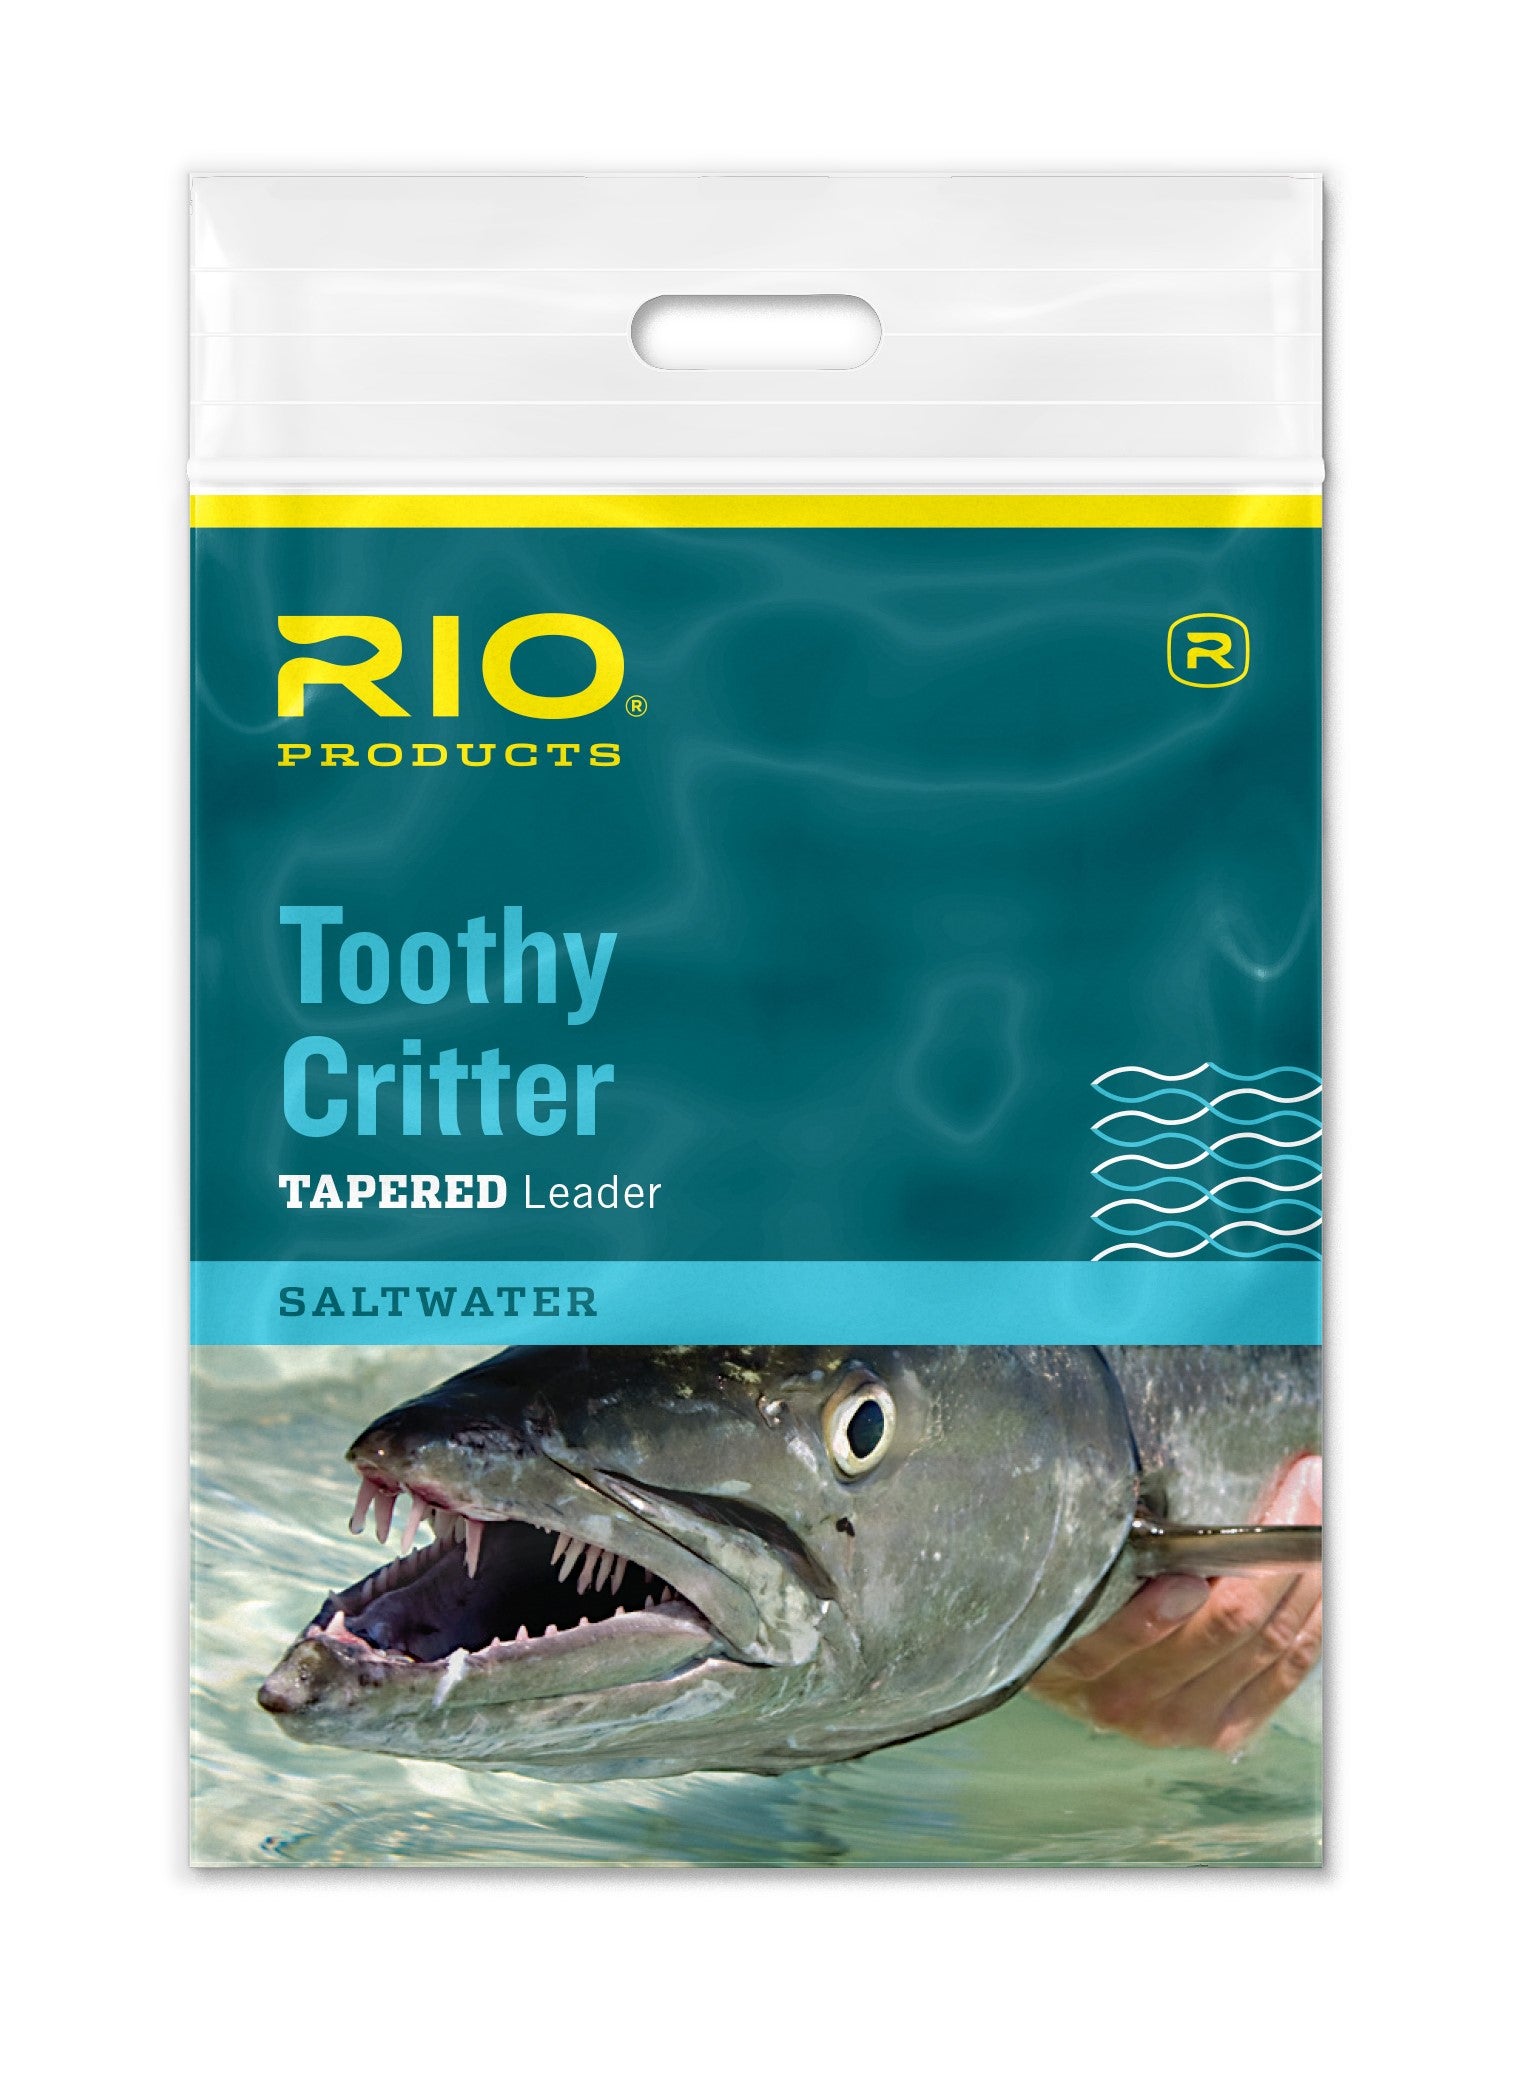 RIO Powerflex Wire Bite Tippet // Barracuda and Toothy Fish Tippet — Red's  Fly Shop